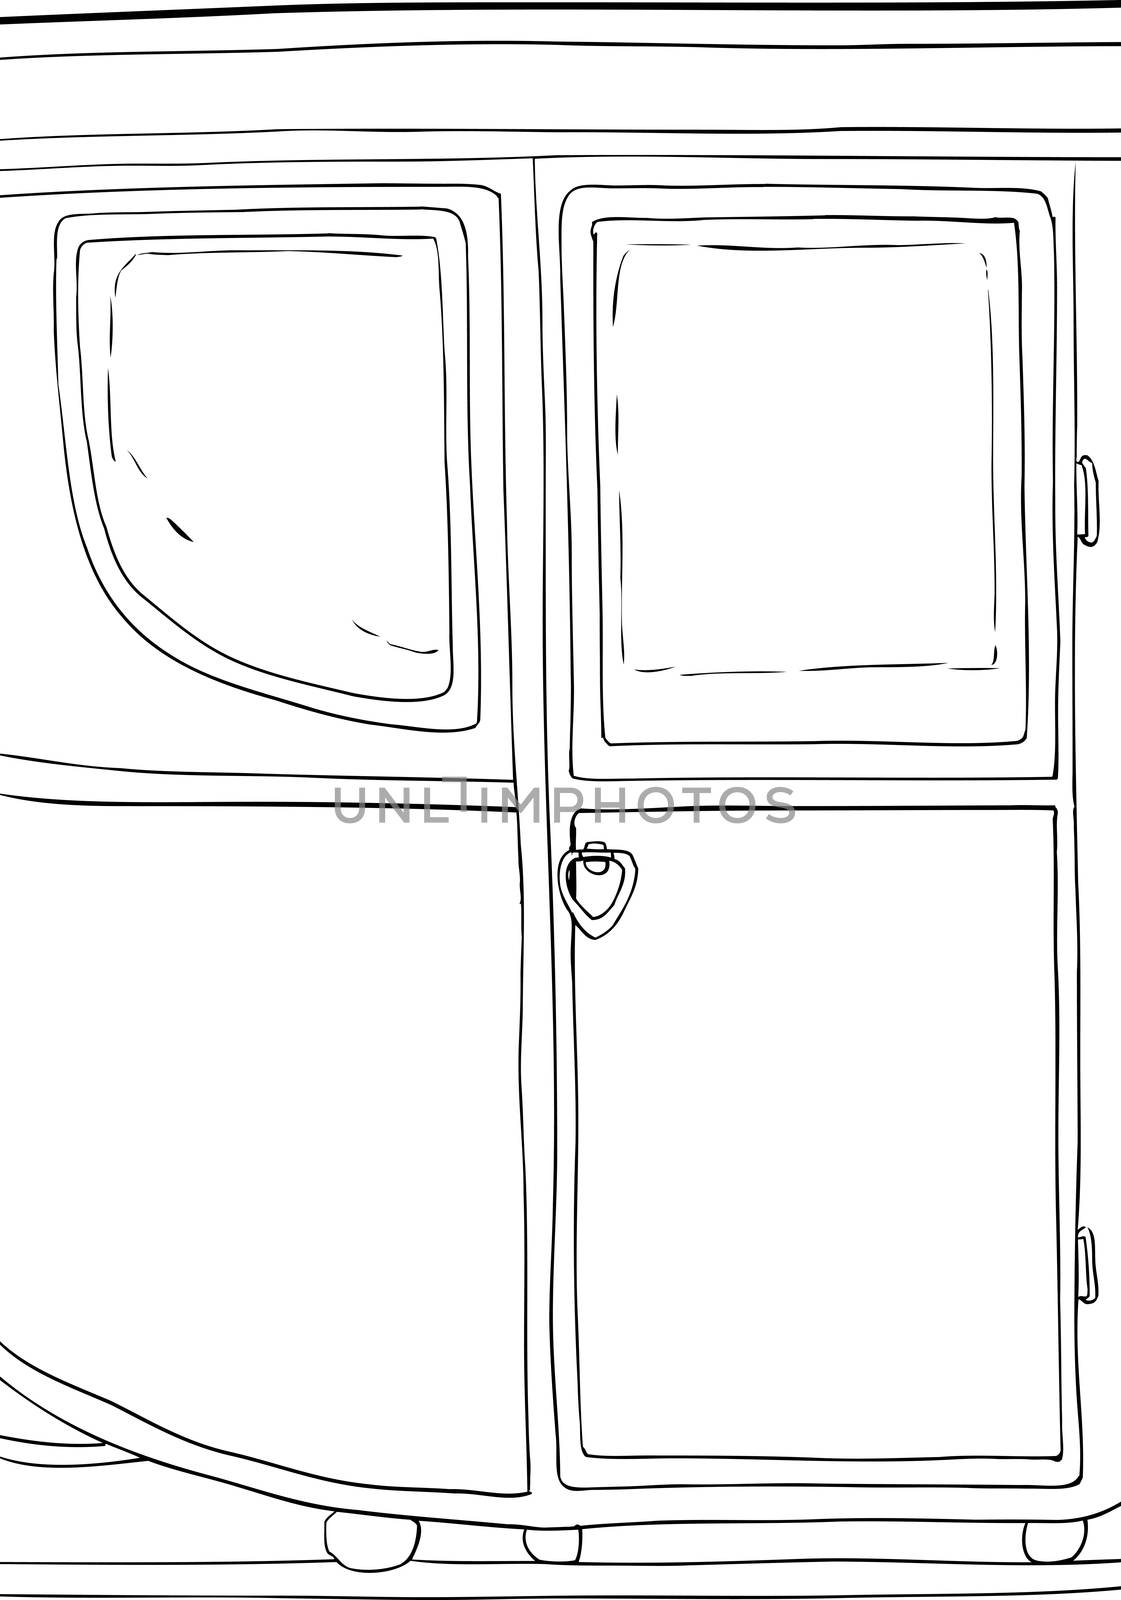 Outlined side view on single 18th century carriage with door